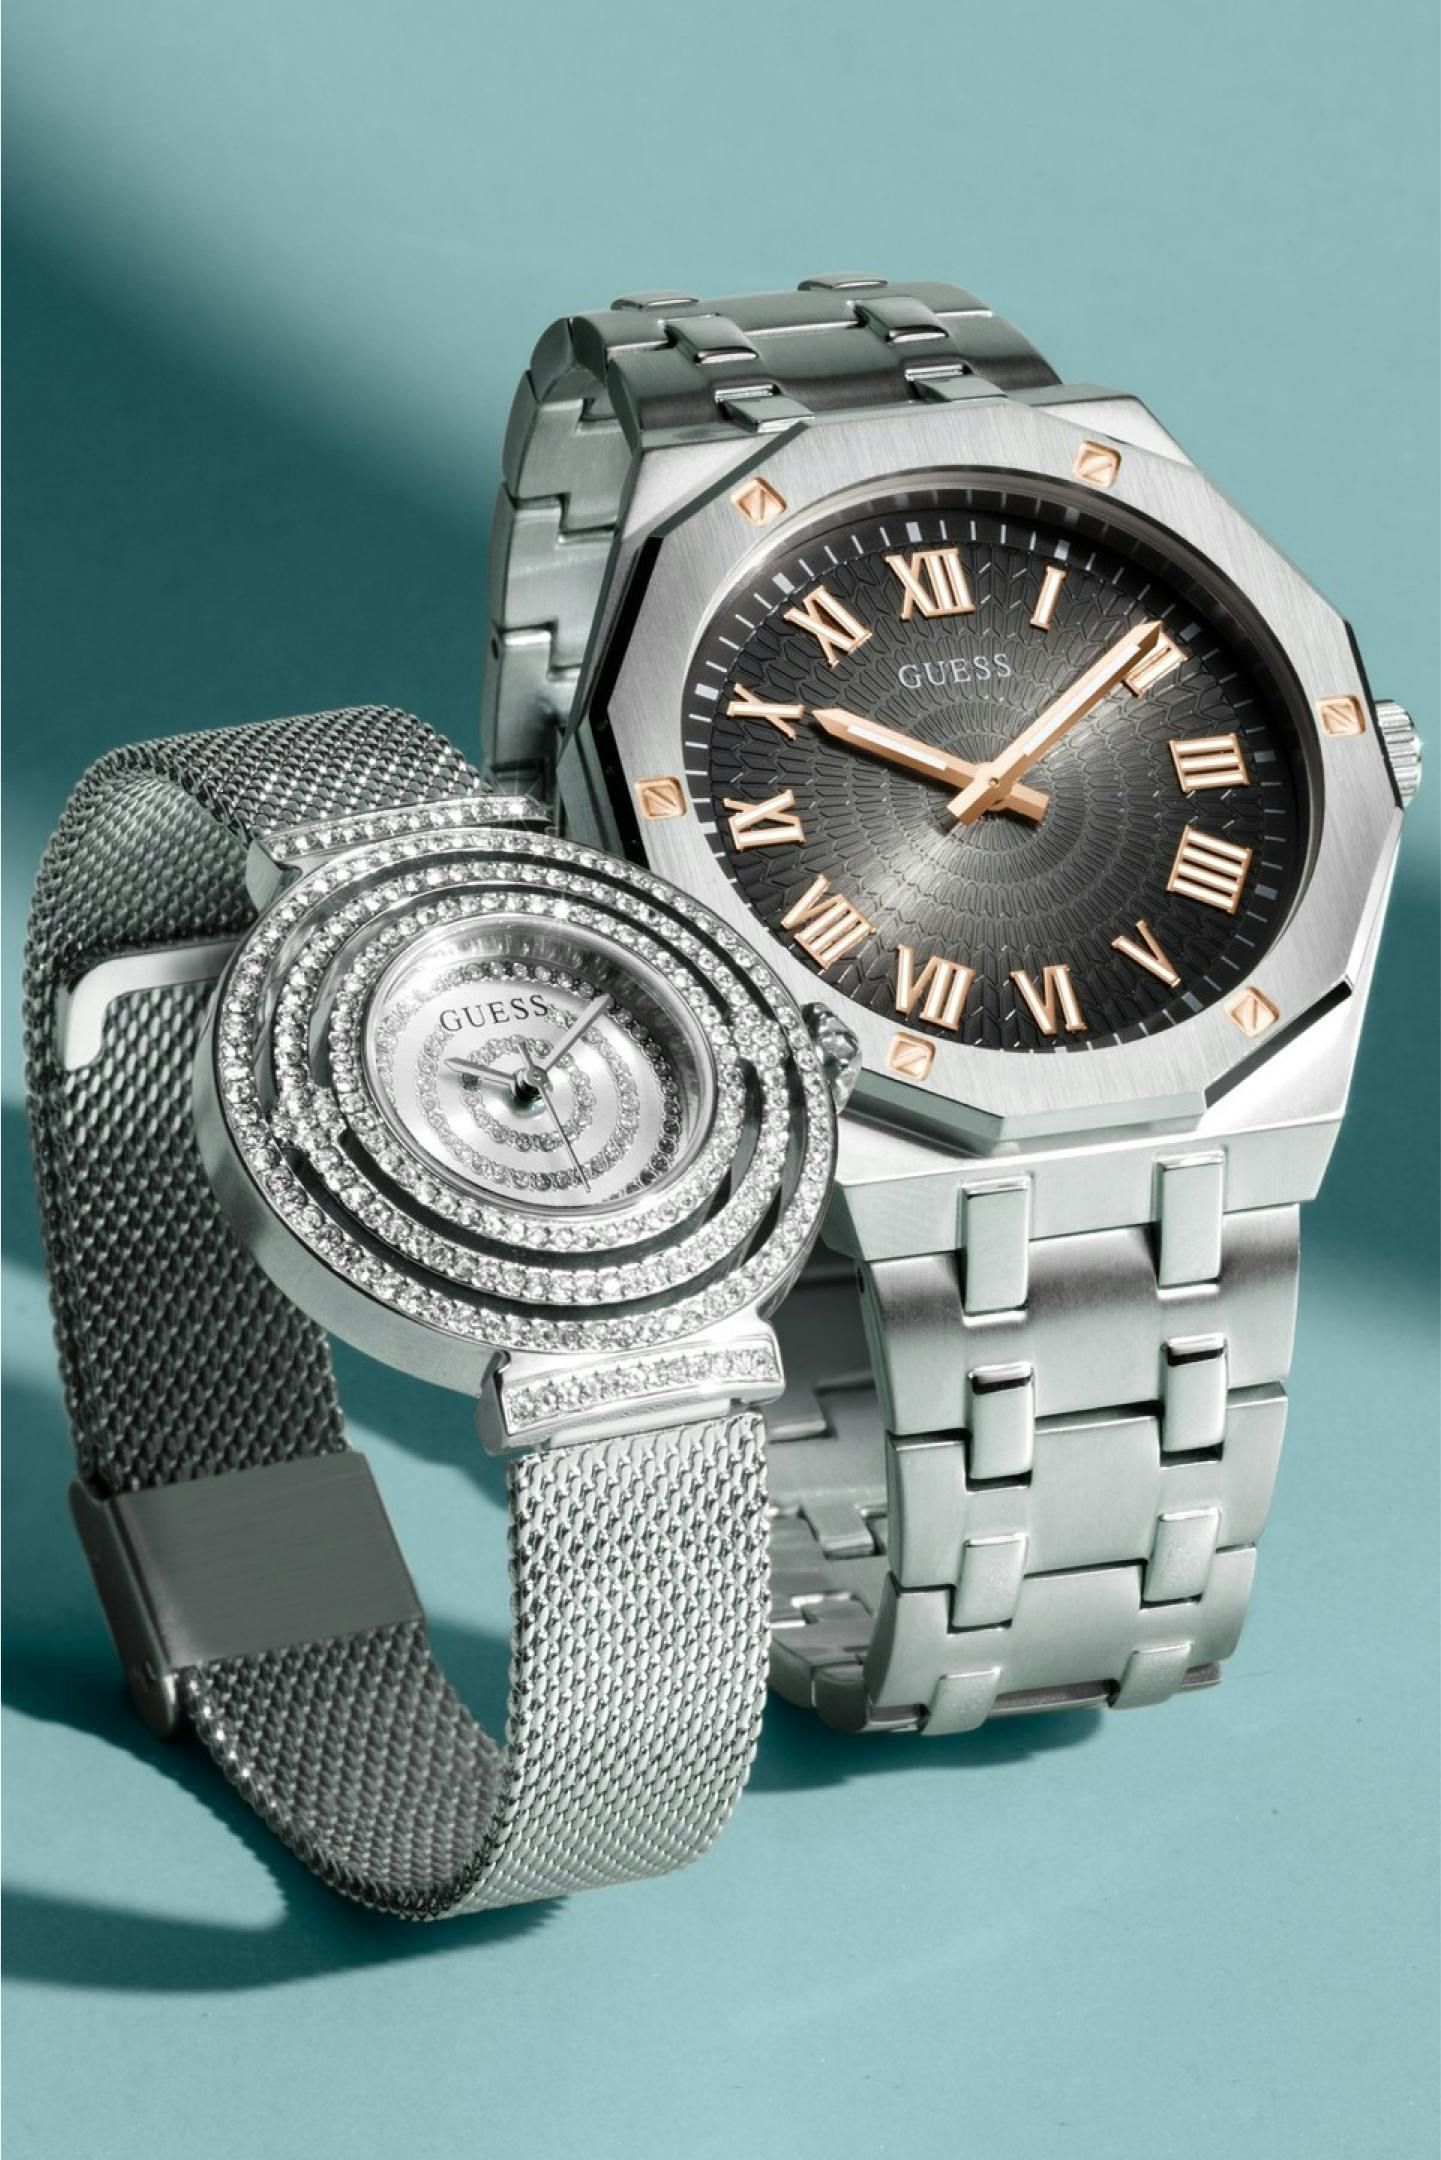 A women's and a men's Guess watch